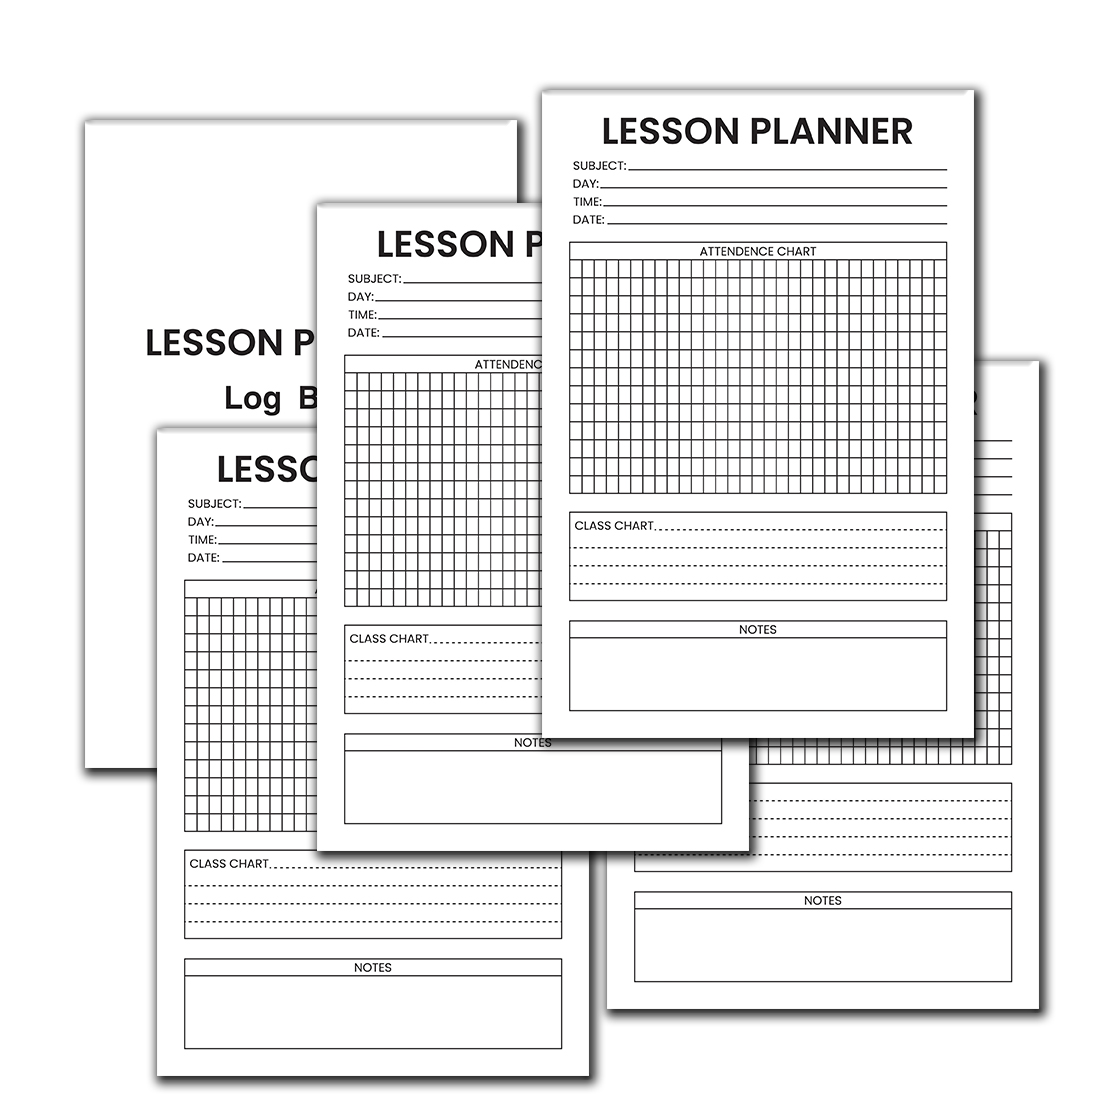 Image with blank elegant pages of lesson planner journal.